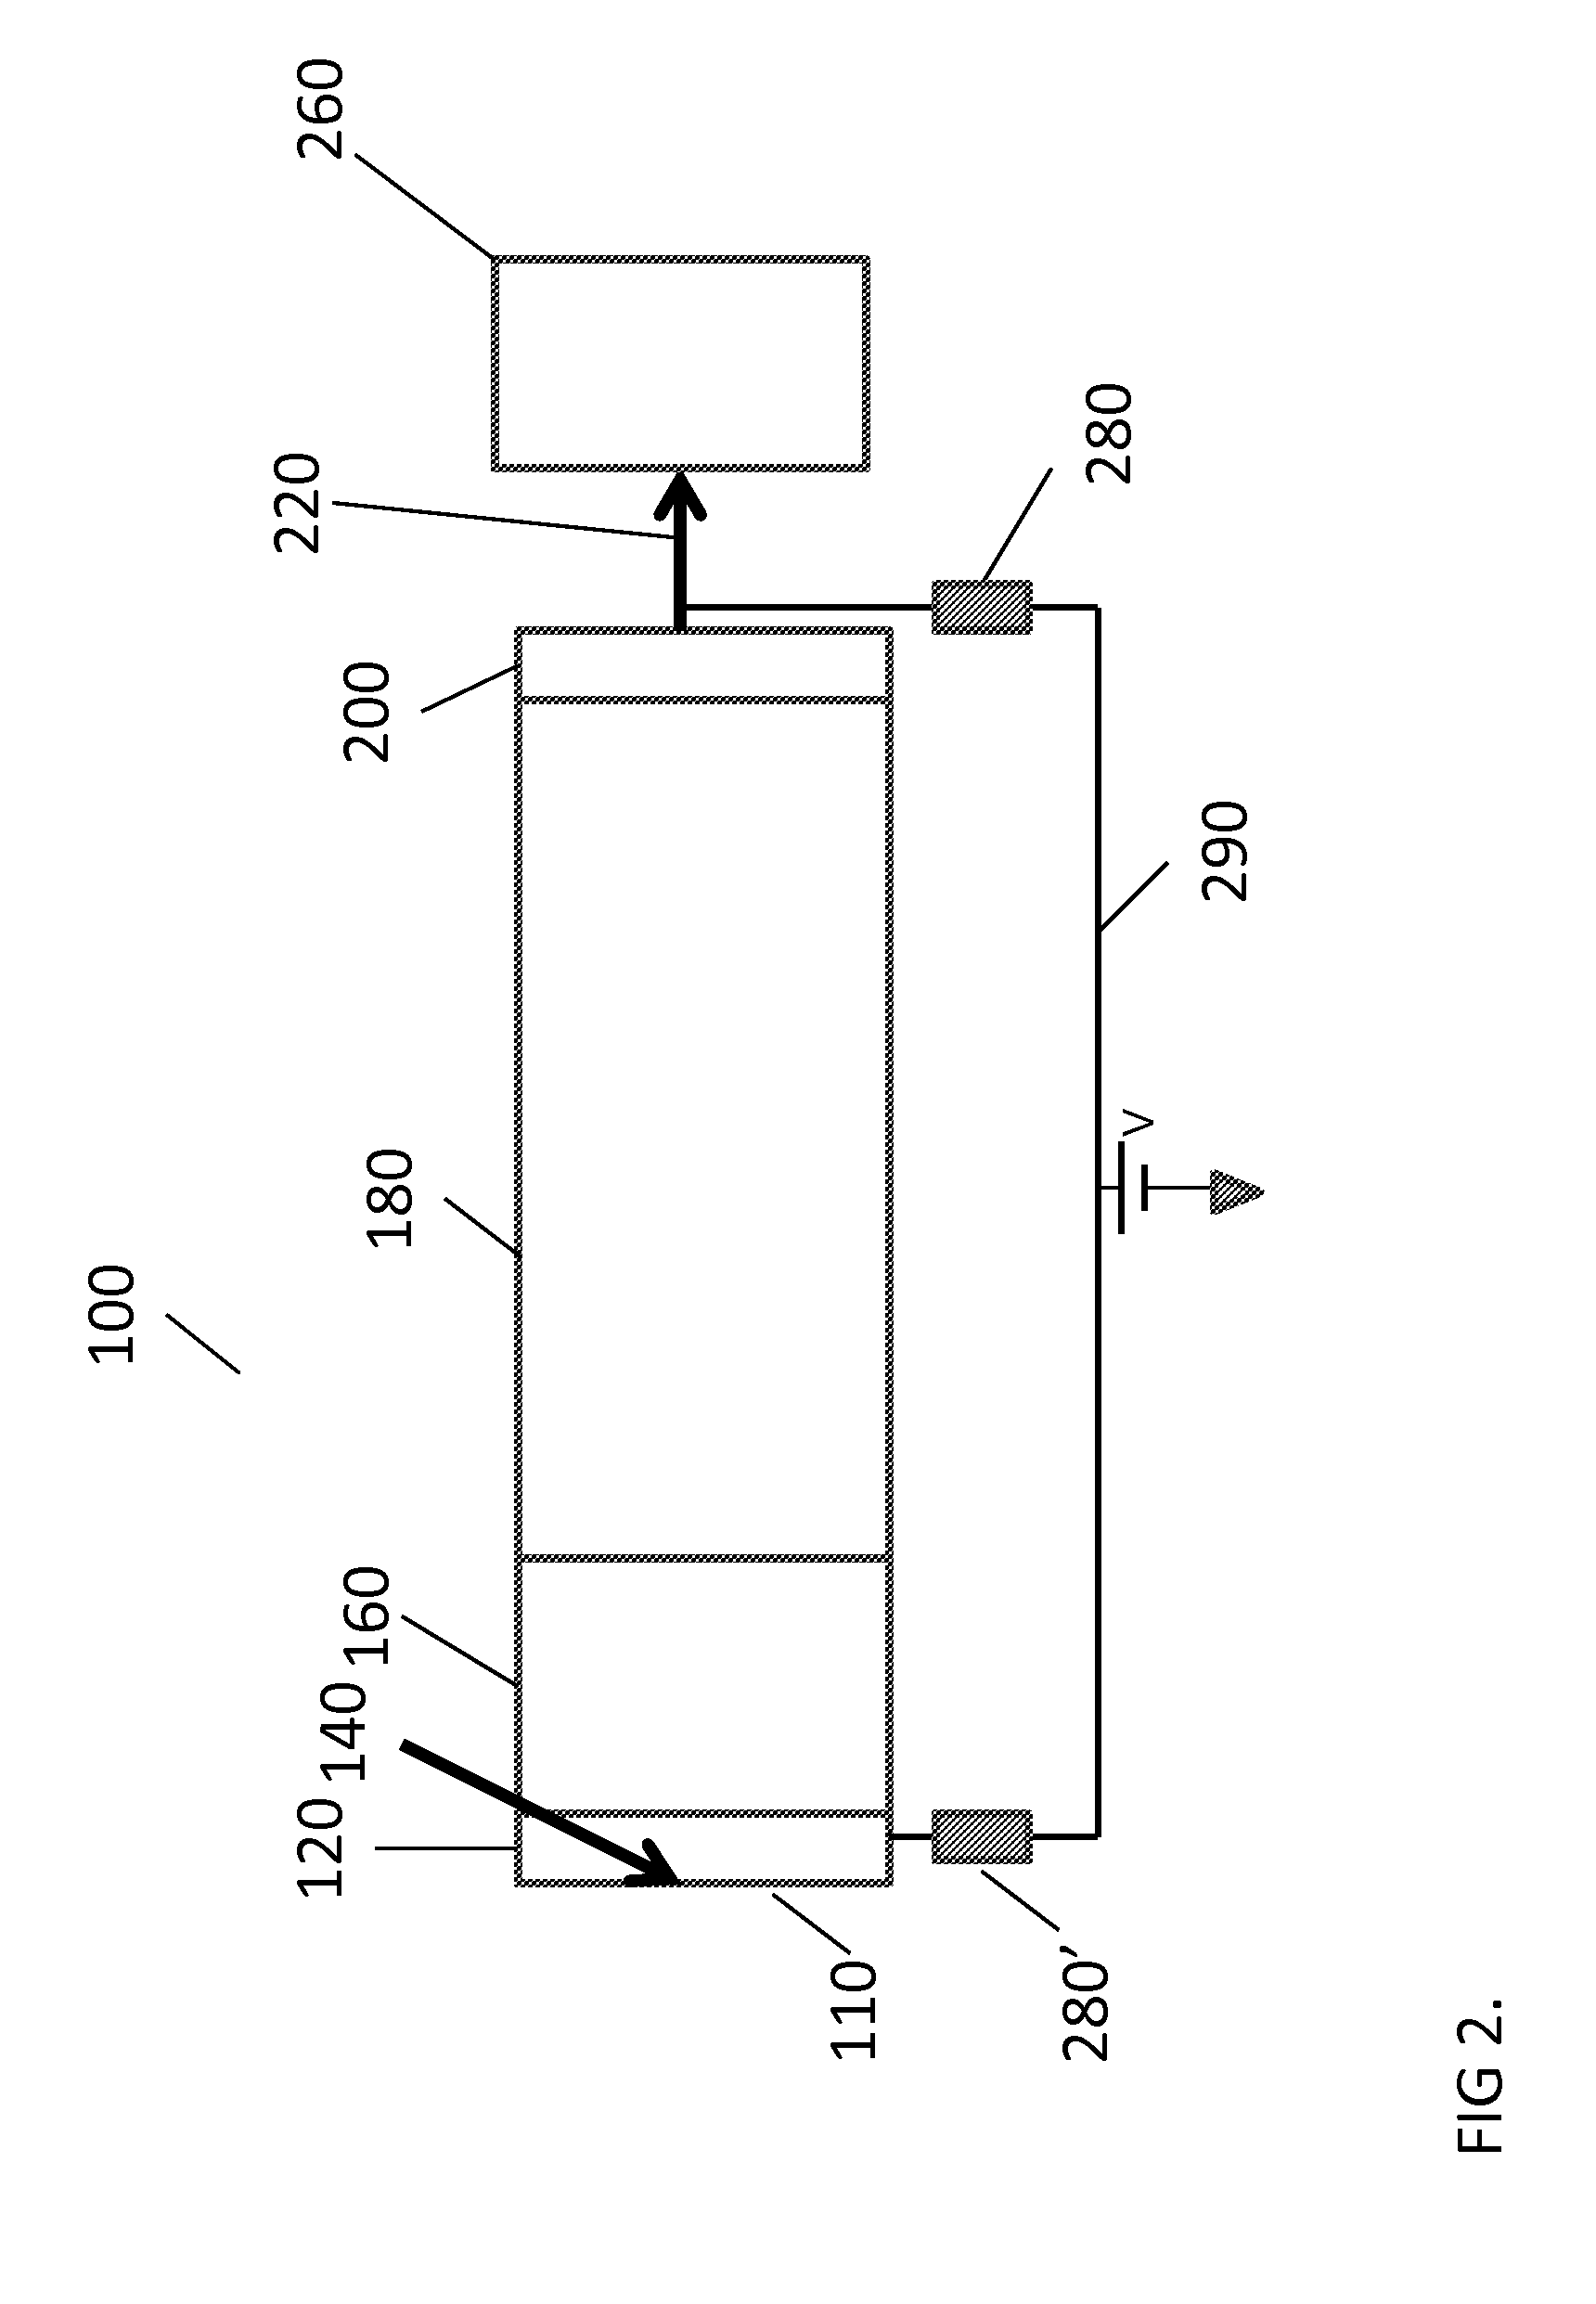 Time-of-flight mass spectrometer with ion source and ion detector electrically connected